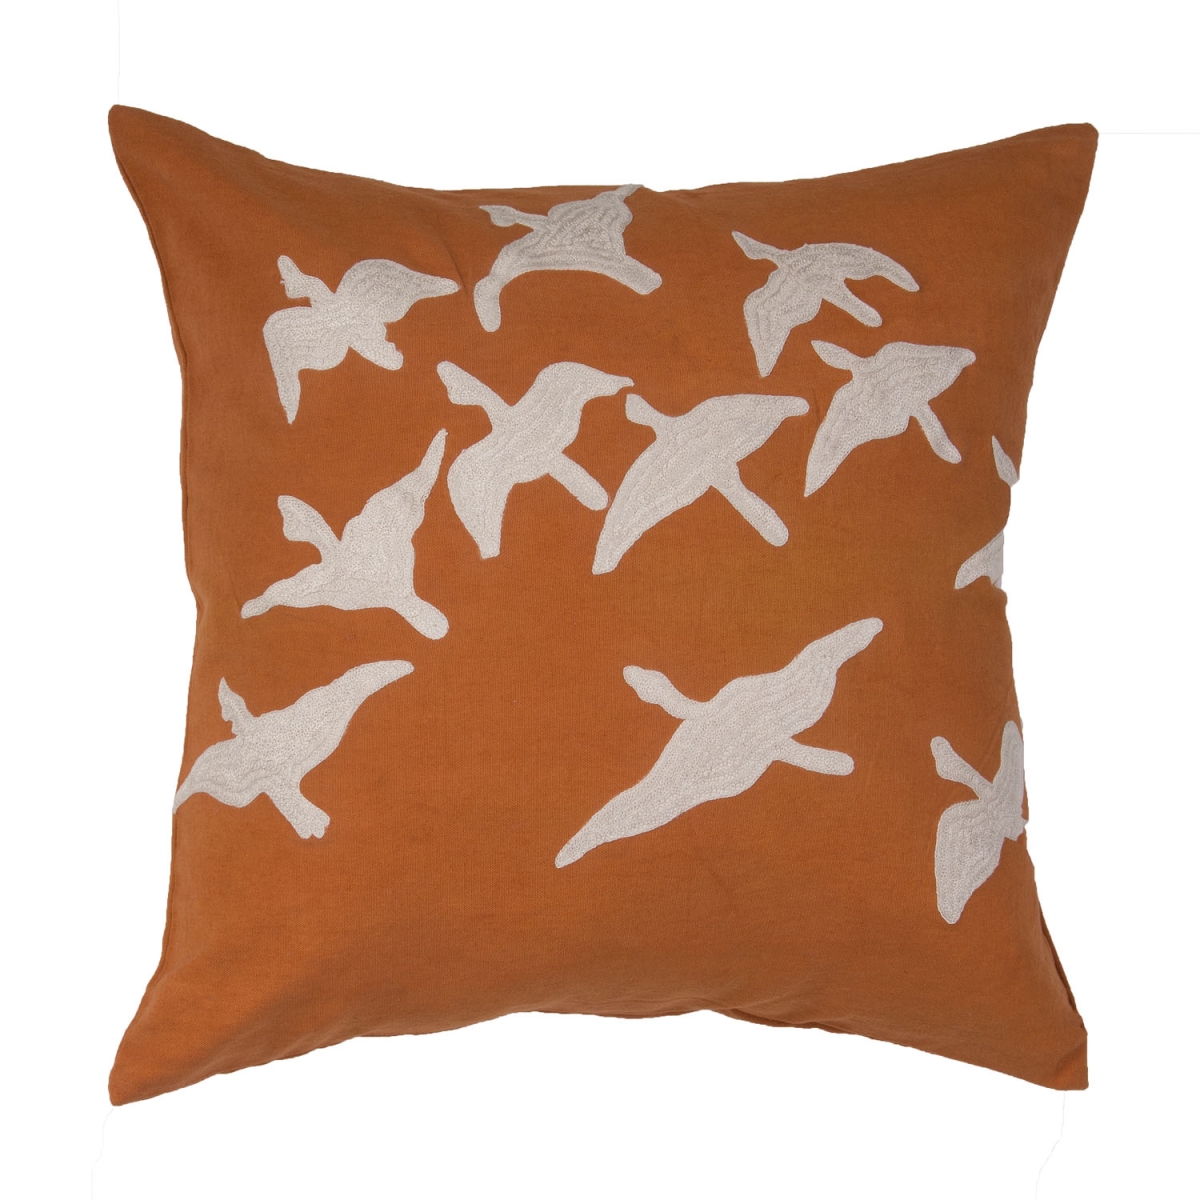 Plw102404 20 X 20 In. National Geographic Home Collection Safiya Orange & Ivory Animal Down Throw Pillow